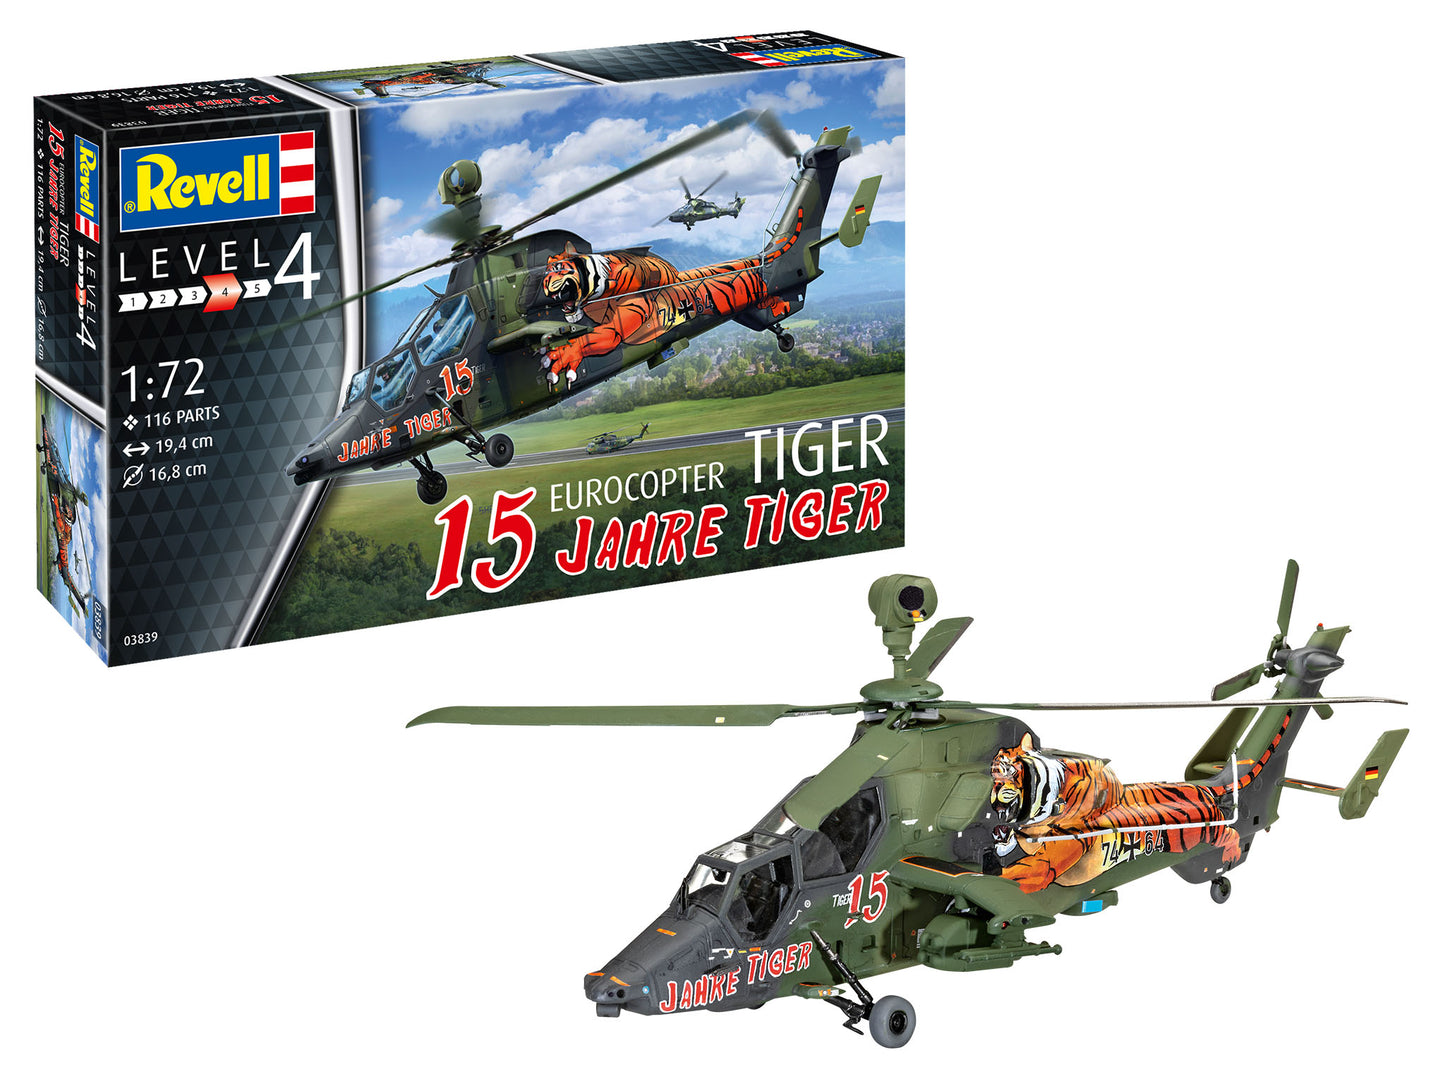 Revell of Germany 03839 1:72 Eurocopter Tiger 15 Yrs Tiger Helicopter Kit